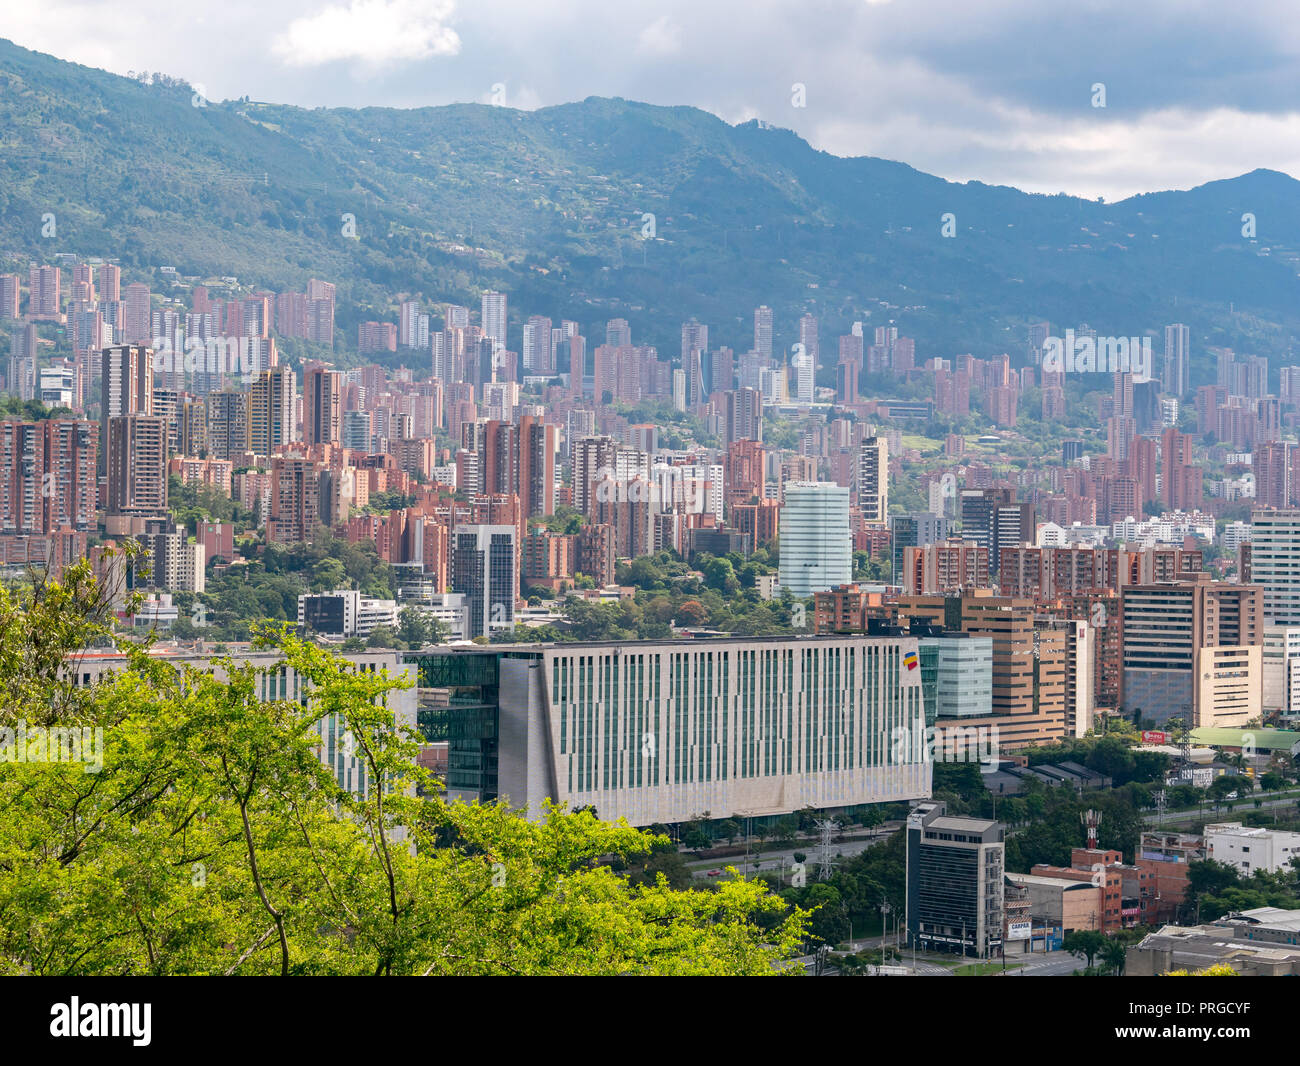 Cityscape and panorama view of Medellin, Colombia. Medellin is the second-largest city in Colombia. It is in the Aburrá Valley, one of the most northe Stock Photo